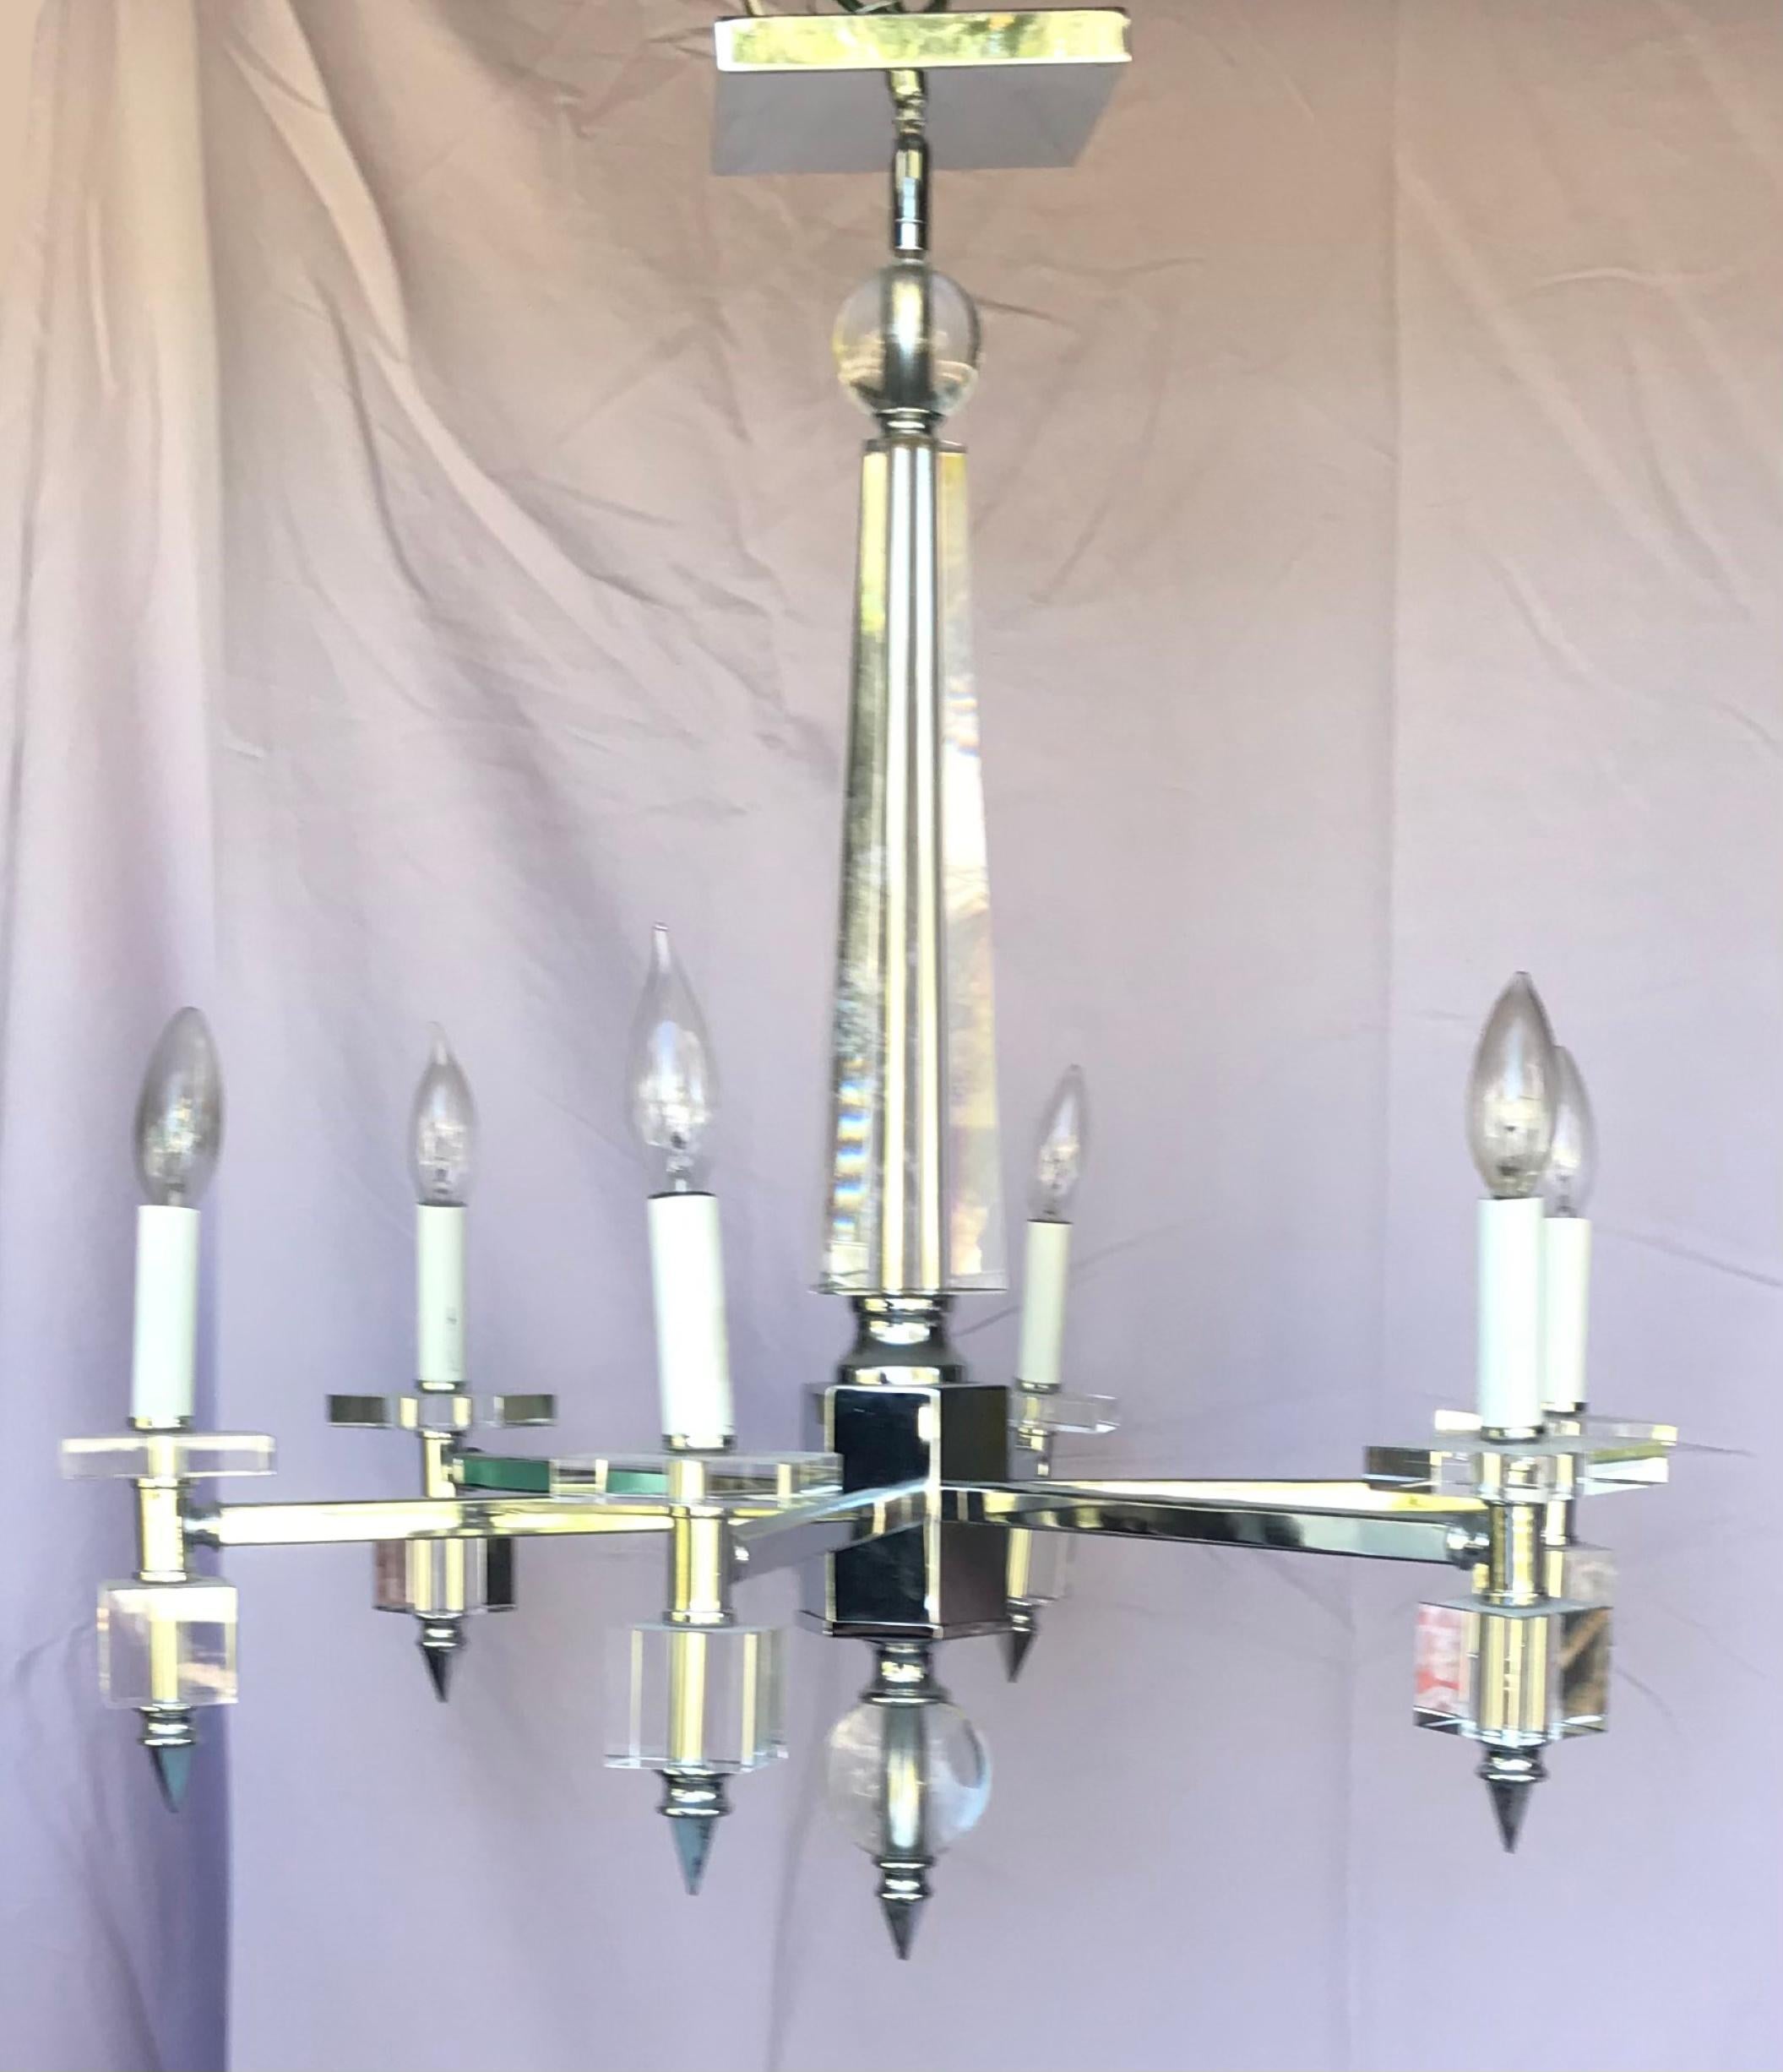 Italian Mid-Century Modern chrome and Lucite six-light chandelier

This elegant and glamorous chandelier is created in the tasteful tradition of Italian design. An abundance of polished chrome and Lucite give this chandelier it’s luxurious